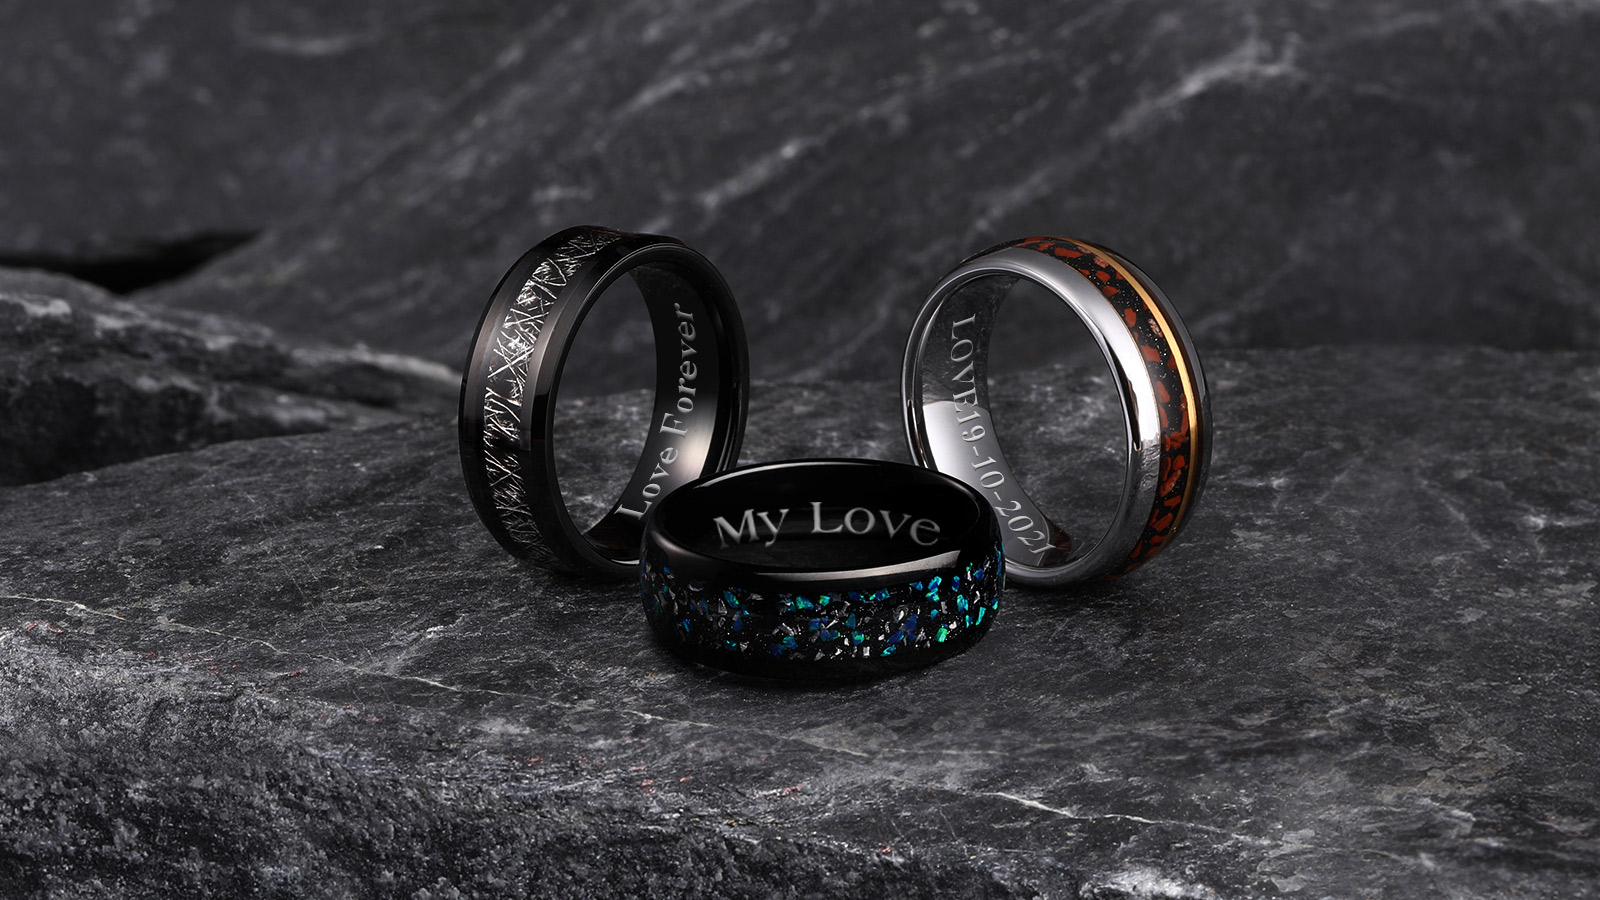 Comfort is a crucial consideration when selecting a wedding band, as it will be worn daily for years to come.